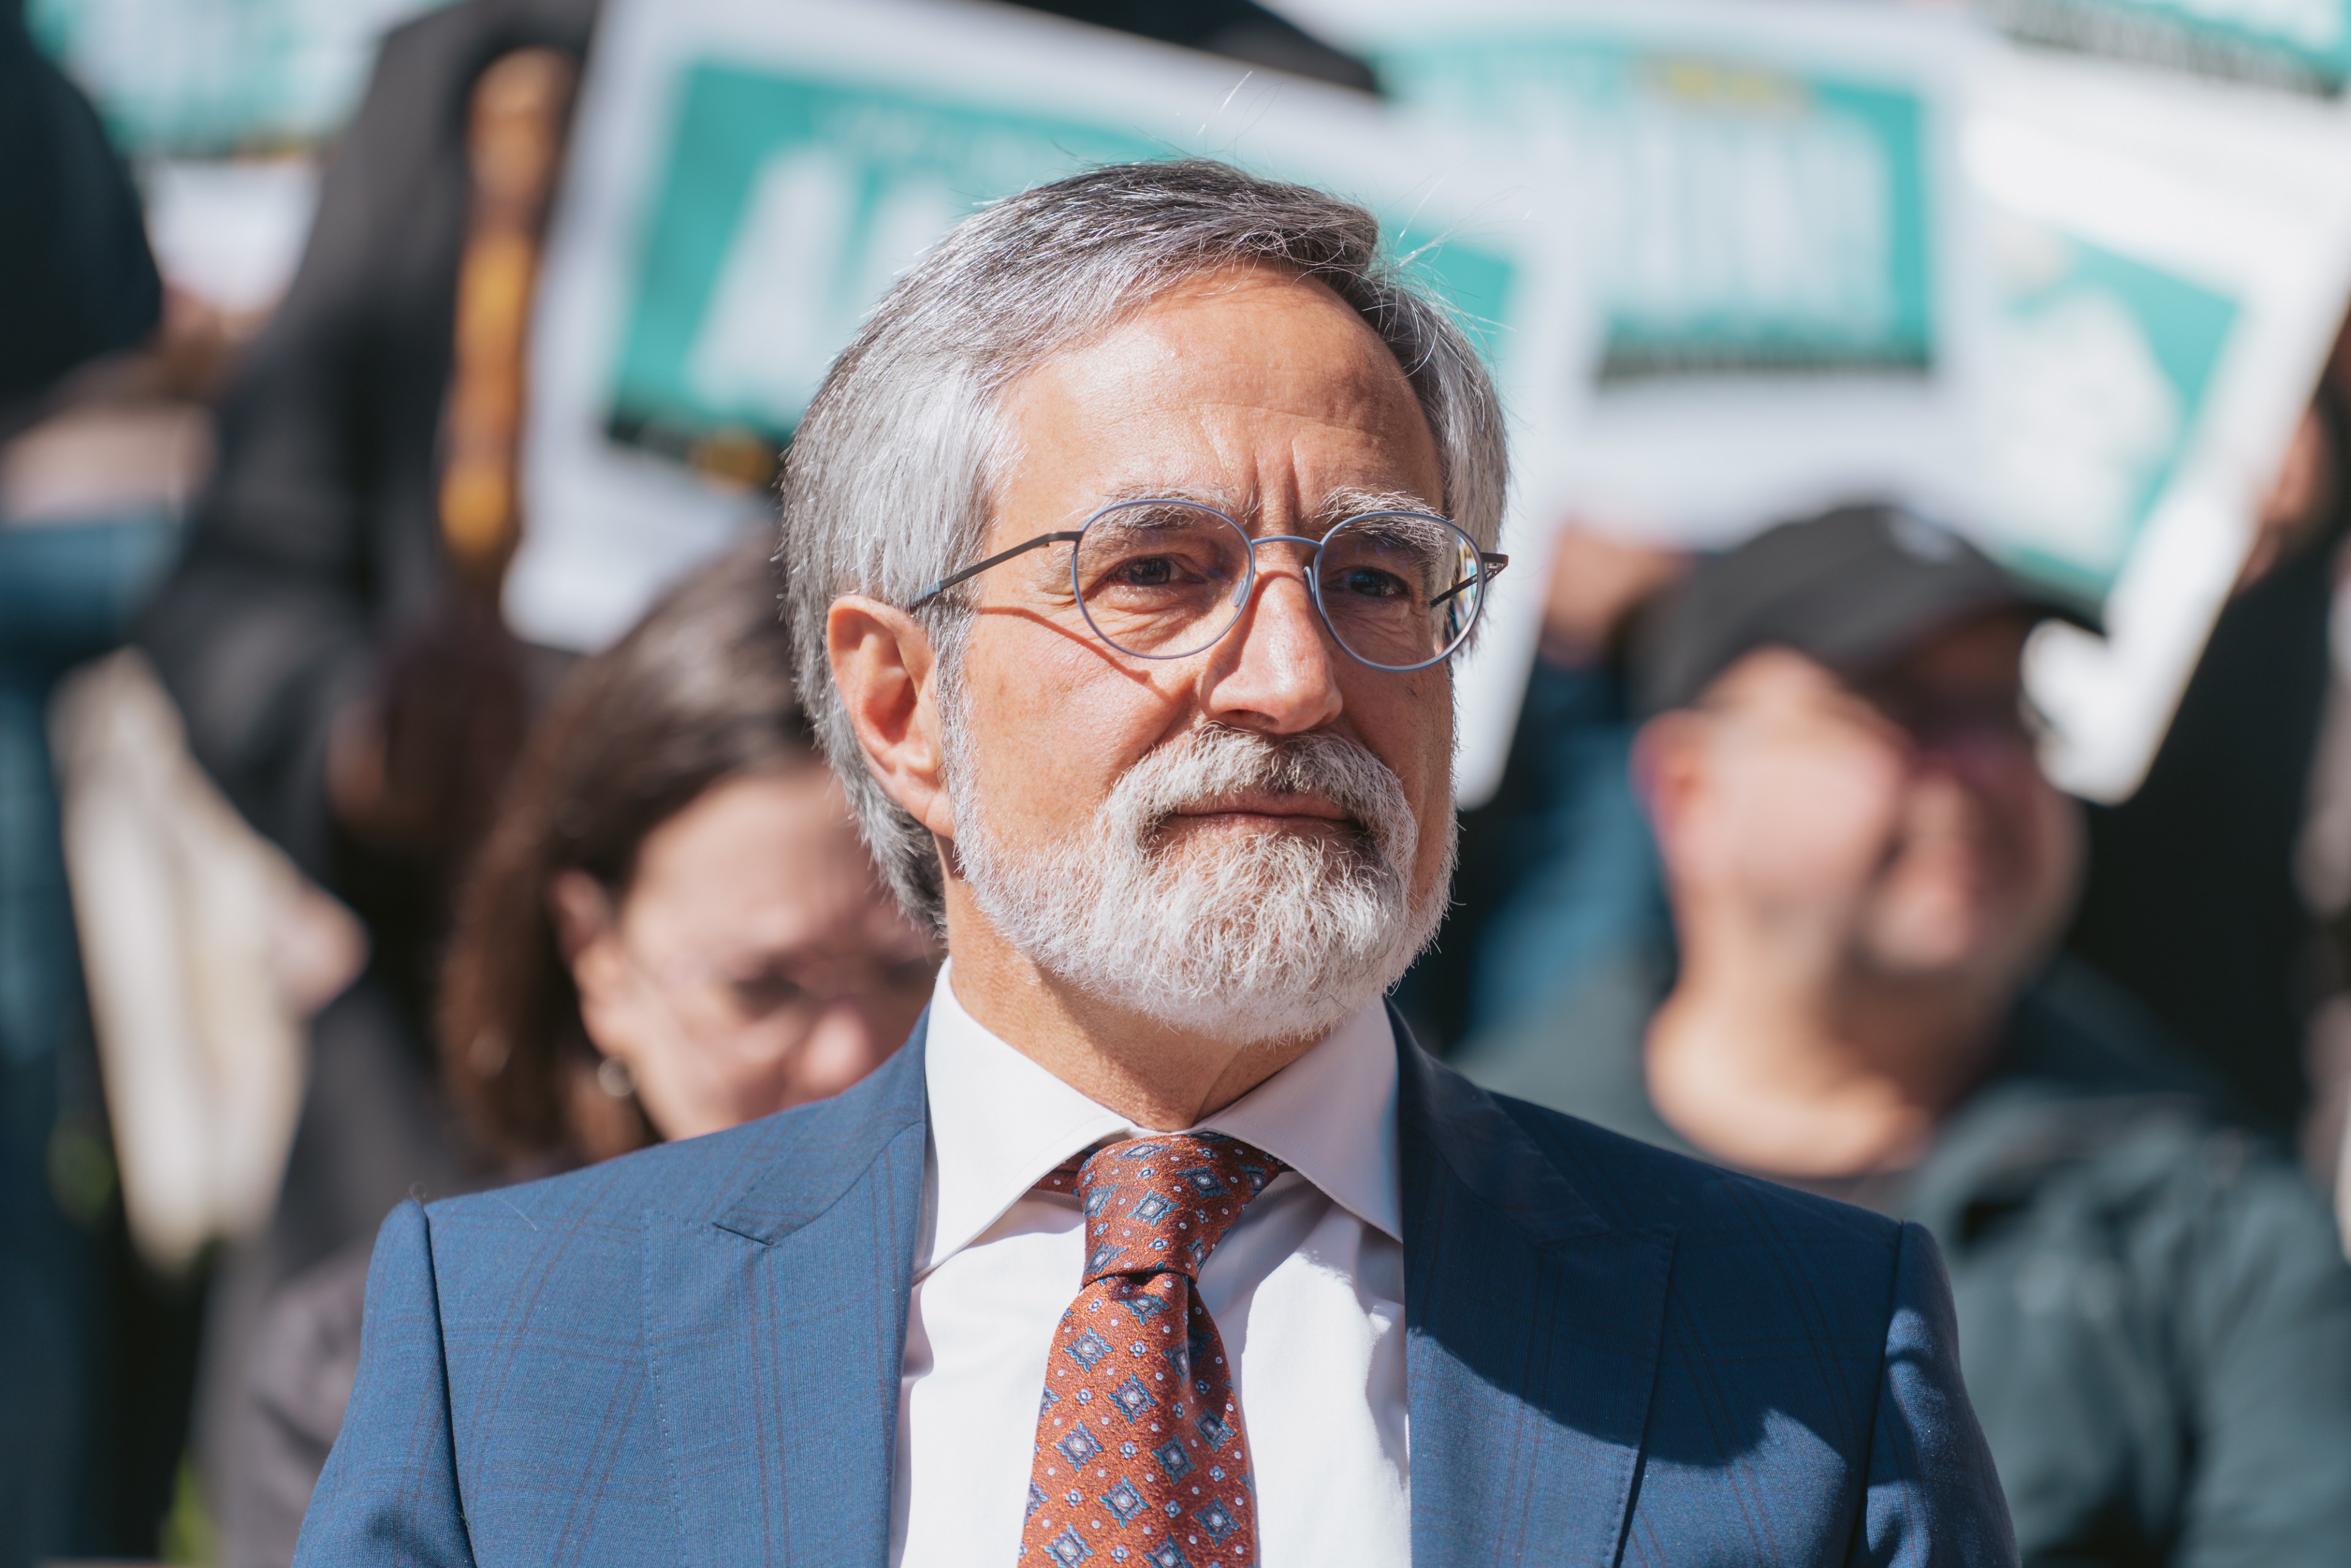 Supervisor Aaron Peskin wearing glasses and a suit is in focus at a daytime outdoor event, with blurry supporters and signs in the background.